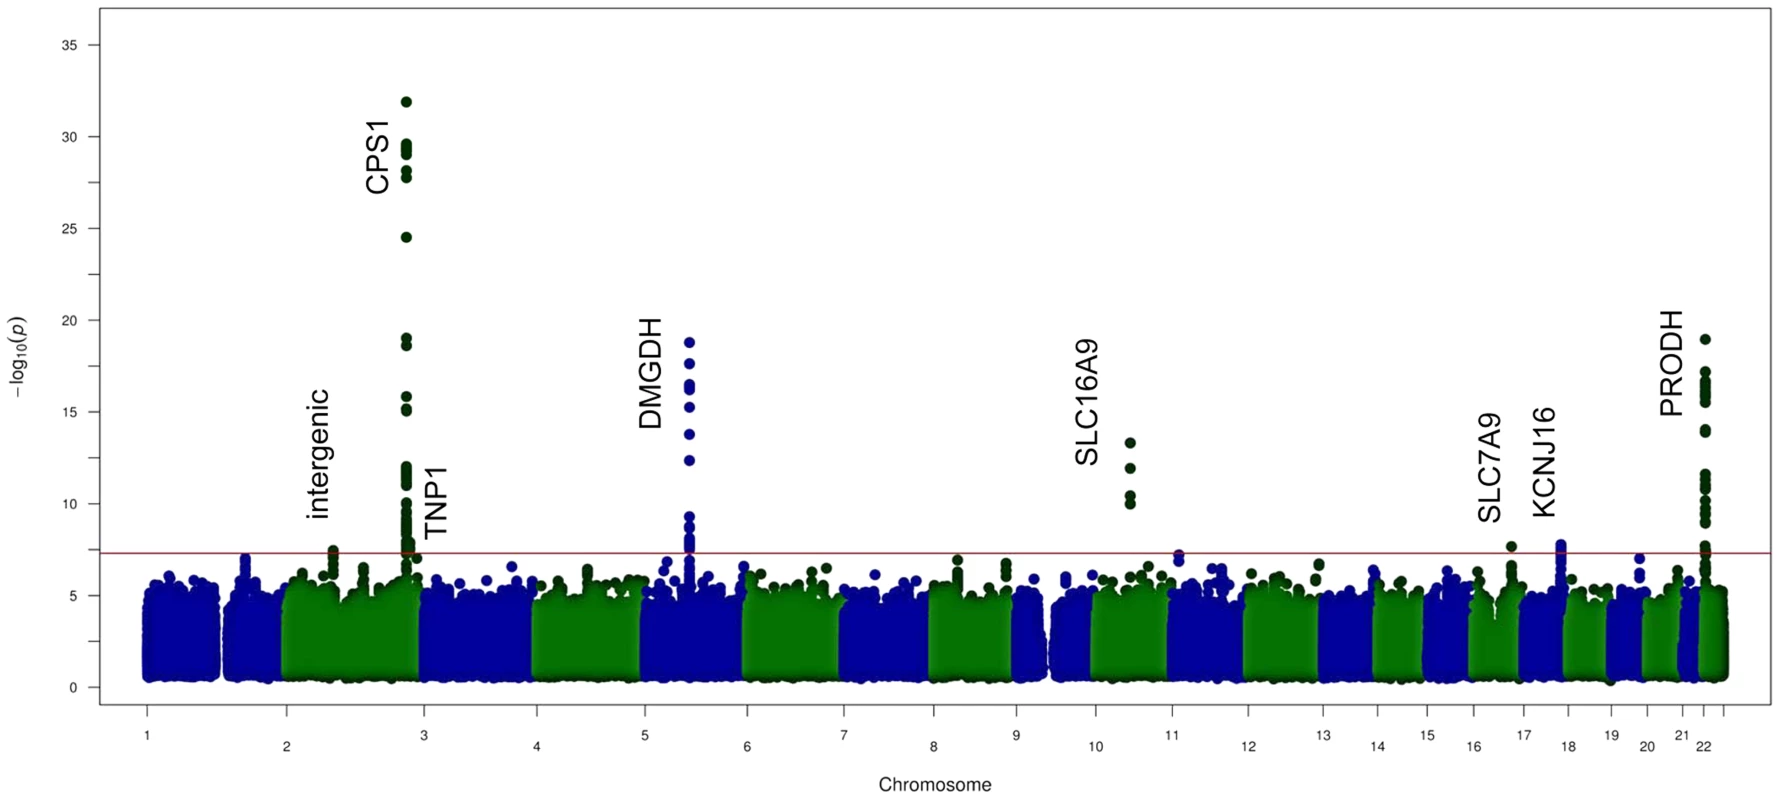 GWAS results of the NMR metabolites.